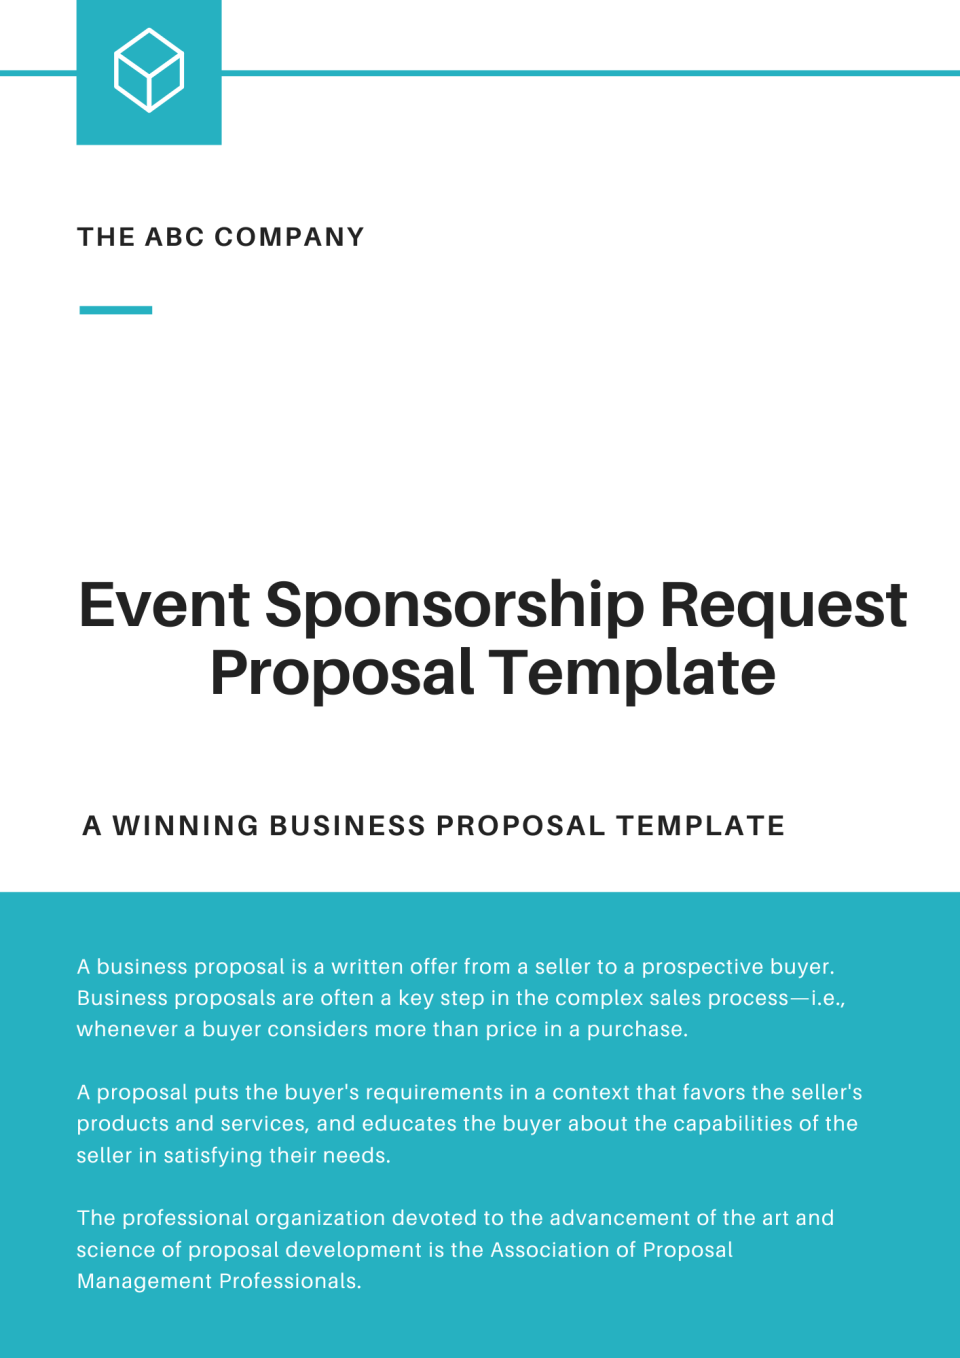 Event Sponsorship Request Proposal Template